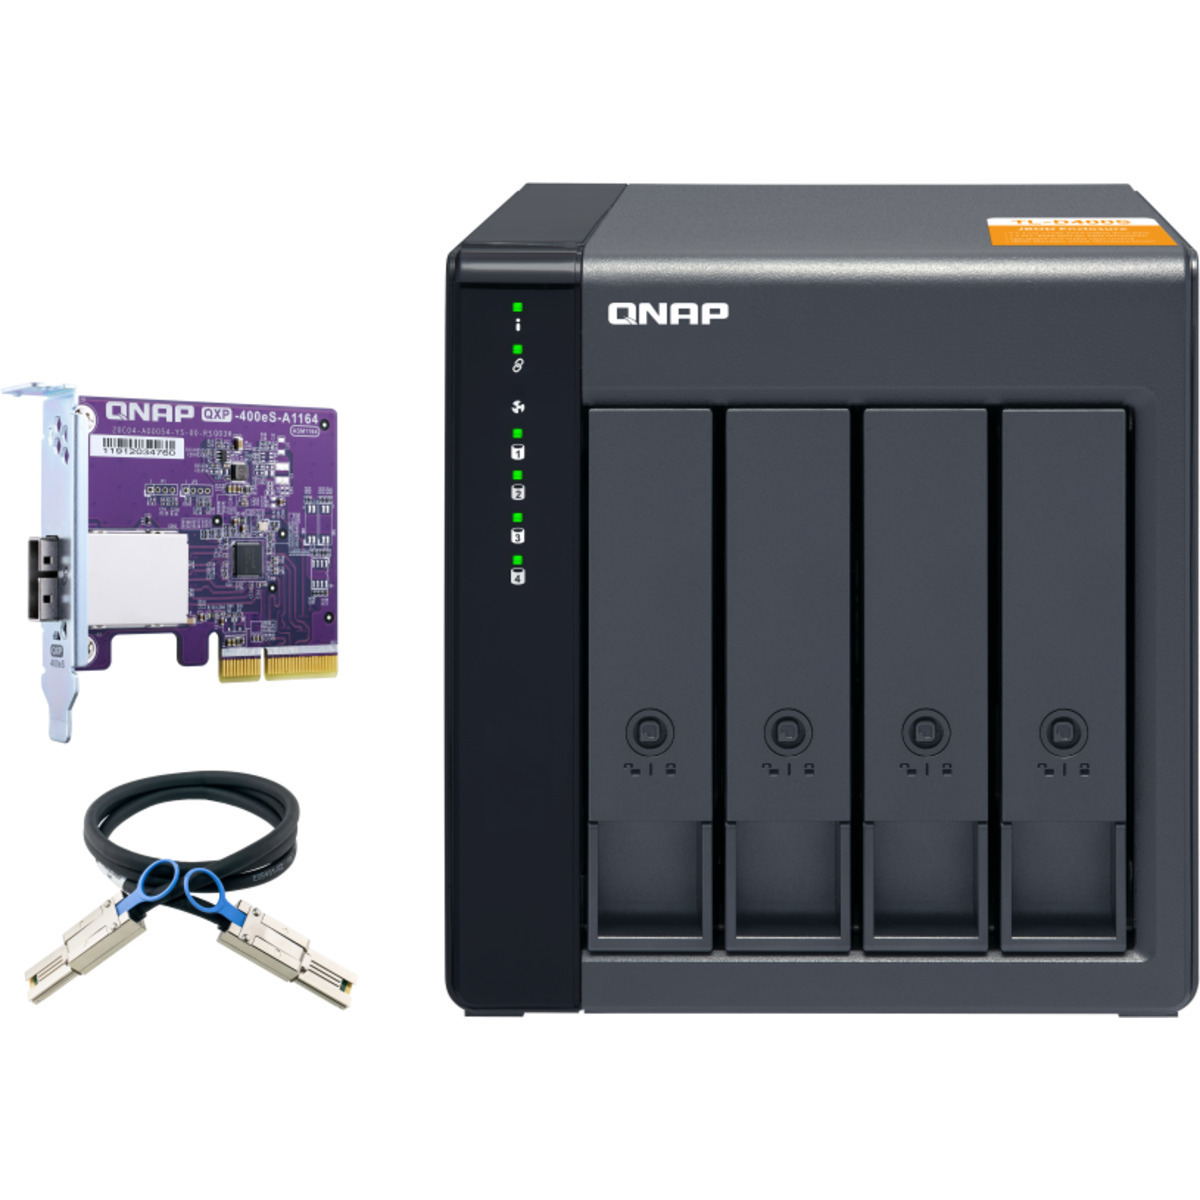 buy QNAP TL-D400S External Expansion Drive 64tb Desktop Expansion Enclosure 4x16000gb Western Digital Ultrastar DC HC550 WUH721816ALE6L4 3.5 7200rpm SATA 6Gb/s HDD ENTERPRISE Class Drives Installed - Burn-In Tested - nas headquarters buy network attached storage server device das new raid-5 free shipping simply usa TL-D400S External Expansion Drive